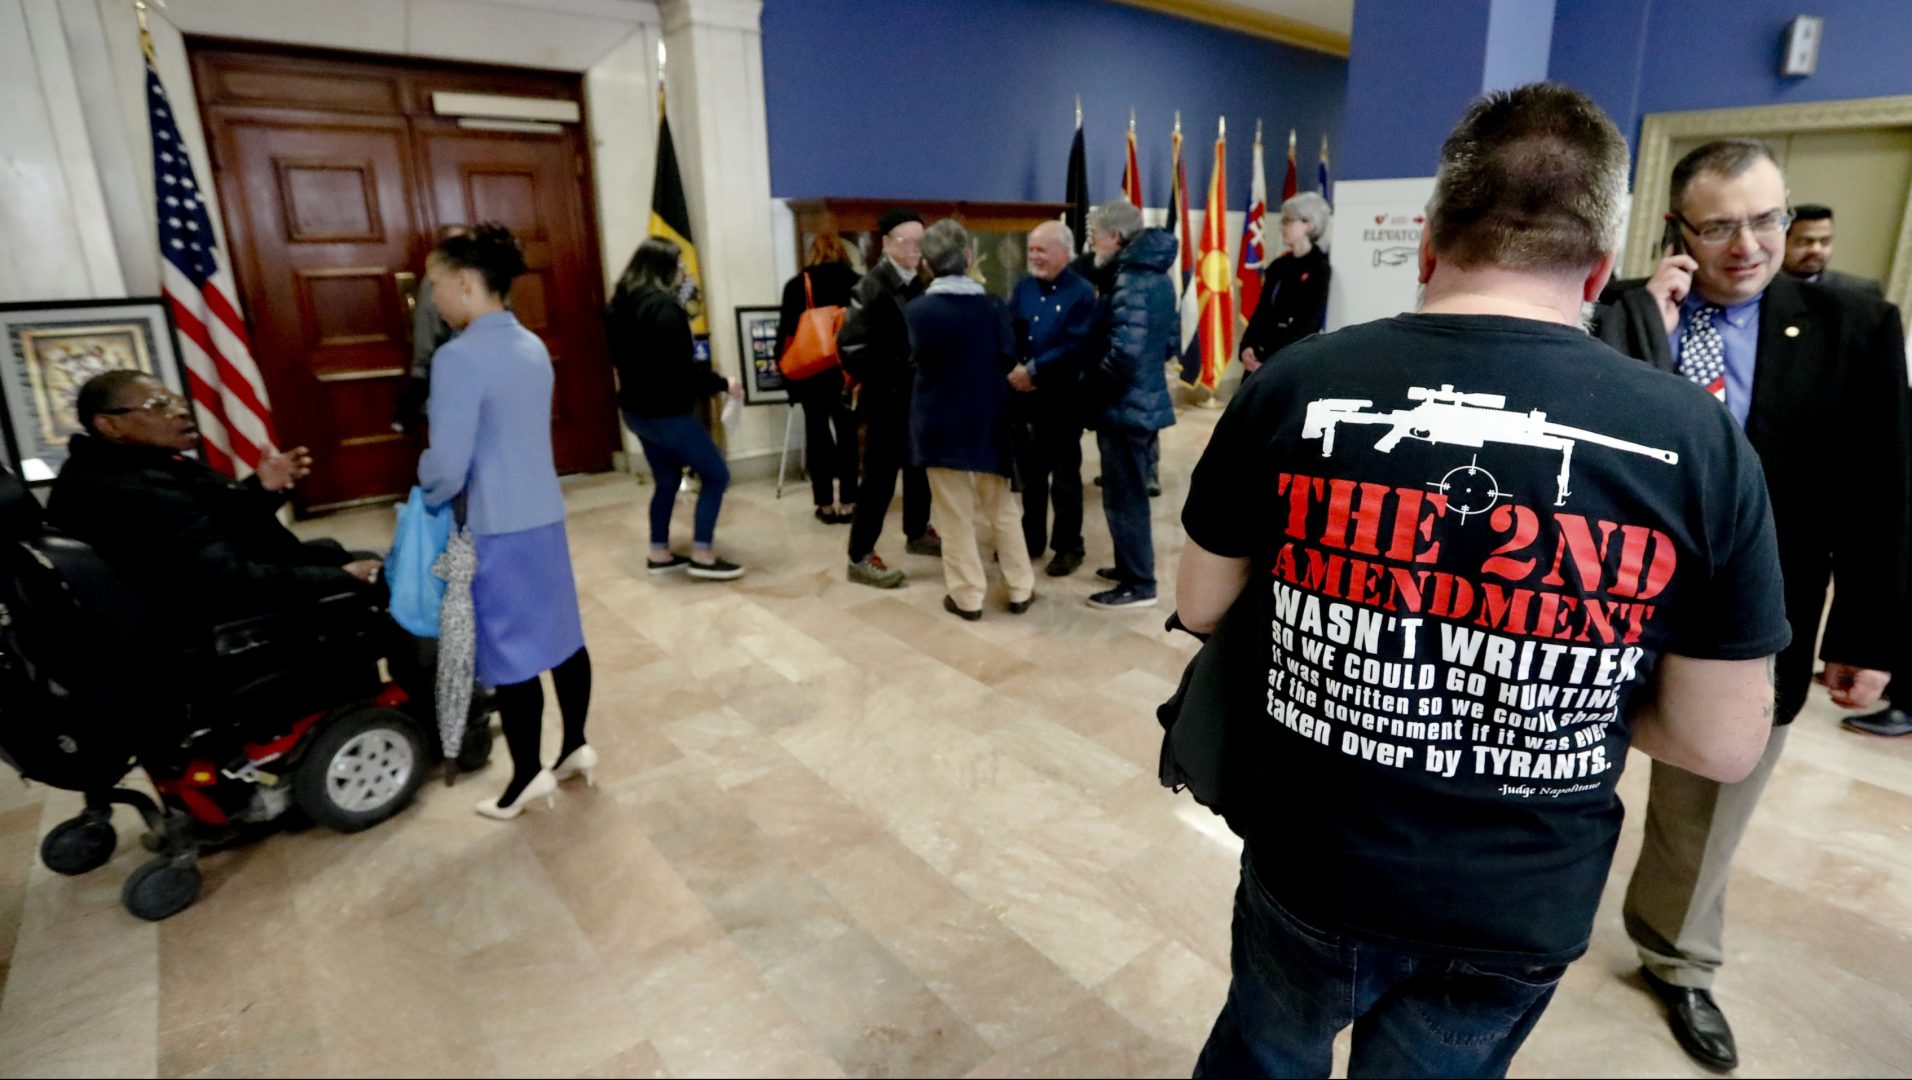 FILE PHOTO: Dennis Jordan, right, a Pittsburgh resident, wears a shirt supporting the 2nd Amendment as he waits with others to attend a Pittsburgh City Council meeting regarding proposed gun restriction legislation, Tuesday, April 2, 2019, in Pittsburgh.